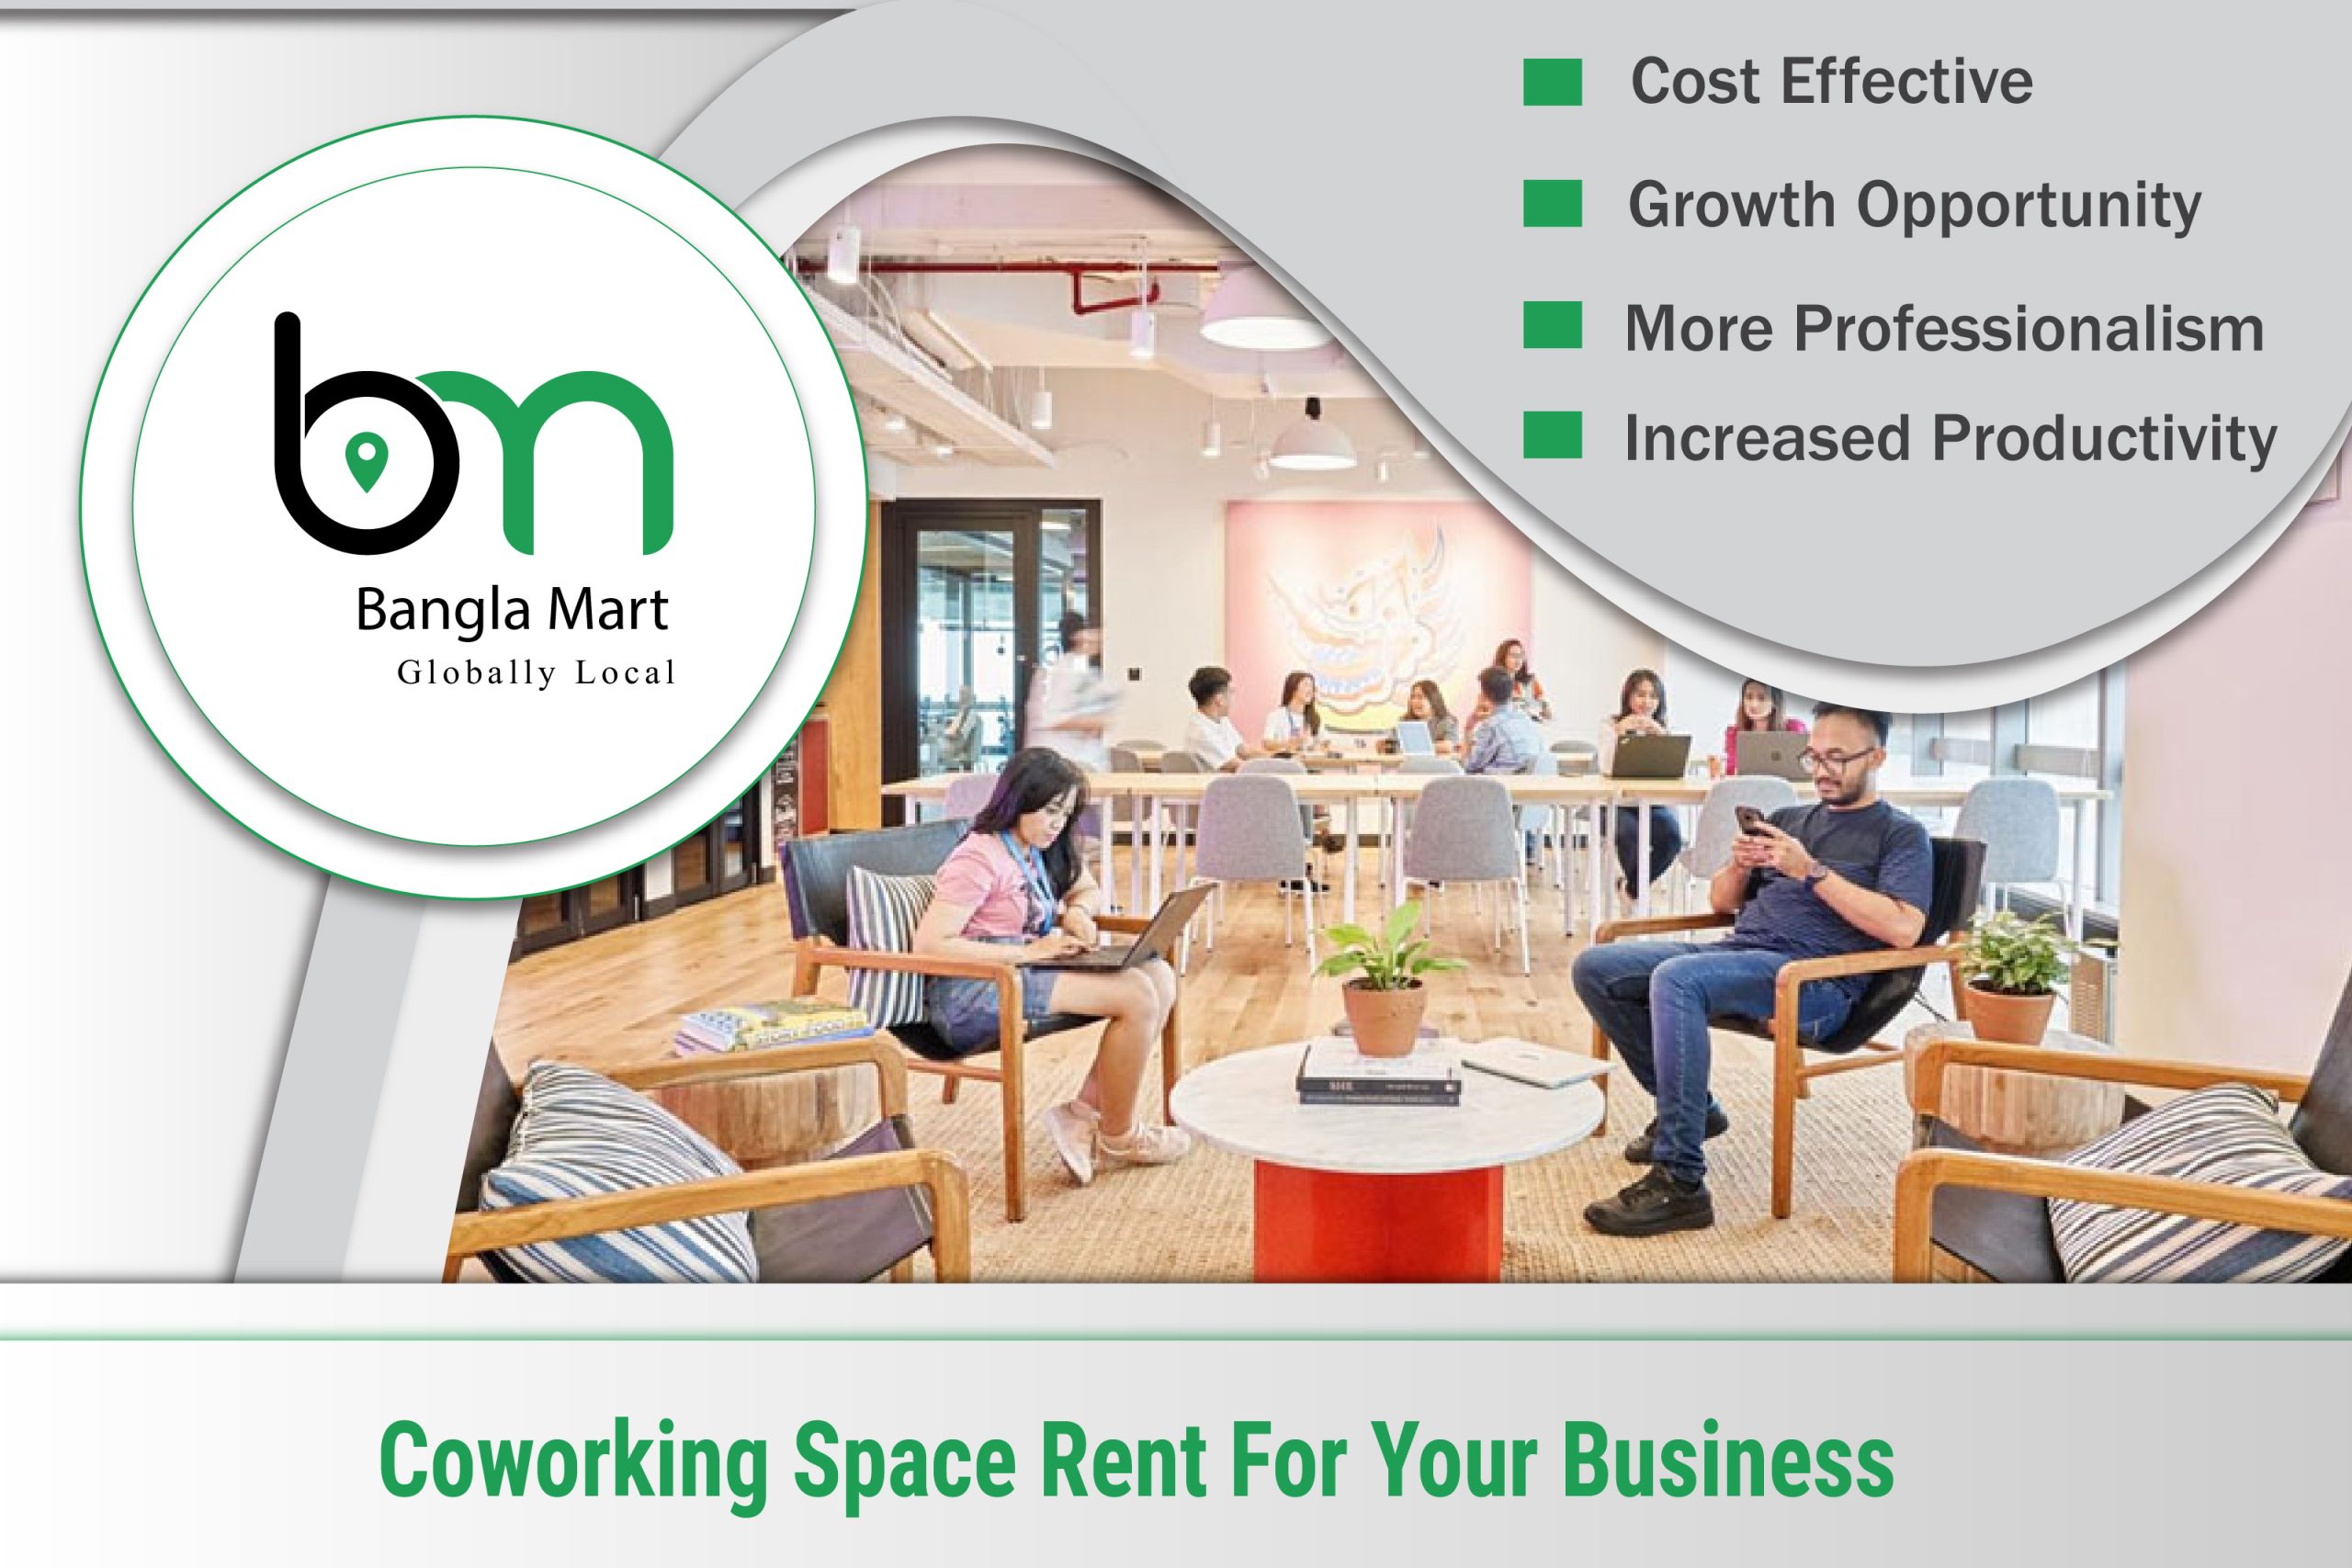 Coworking Space Rent For Your Business